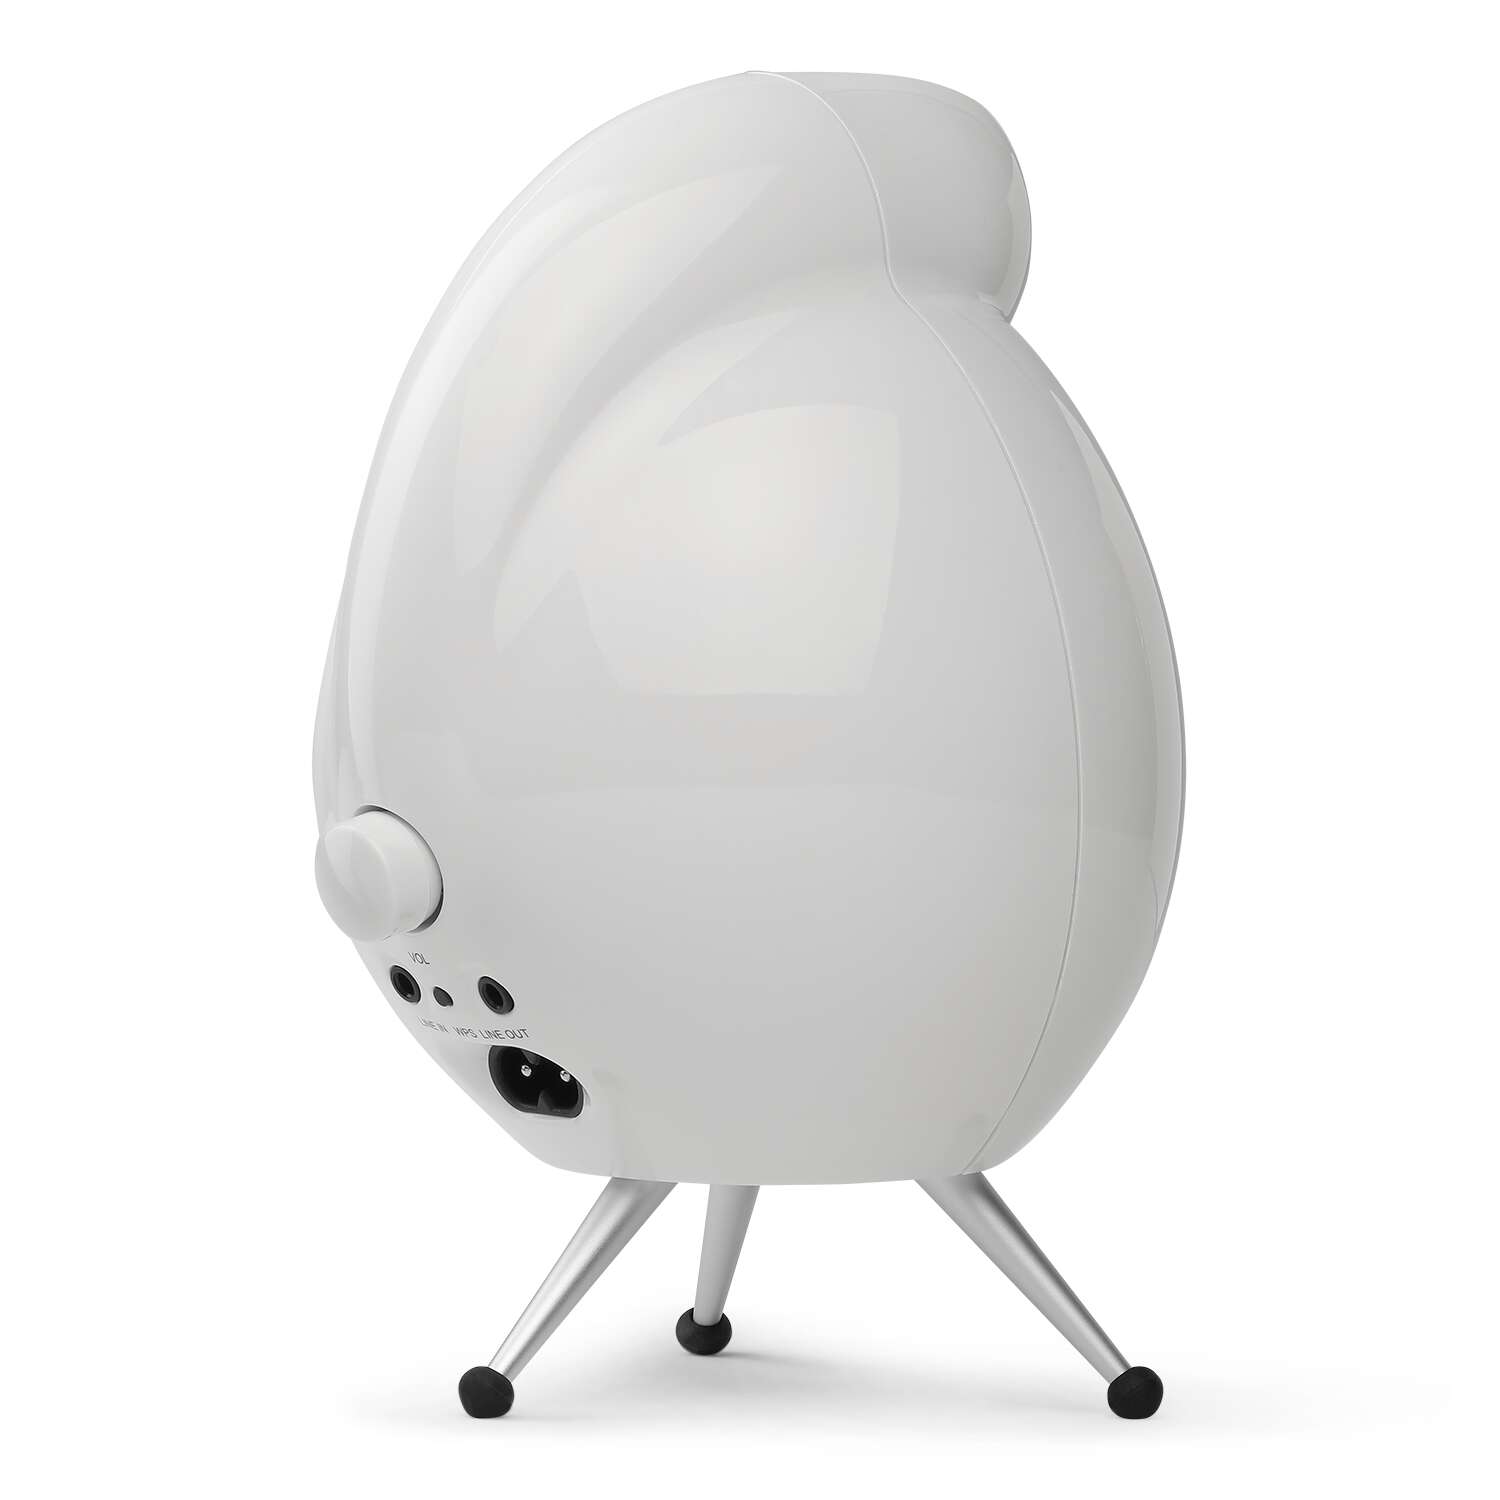 Scandyna podspeakers mcp air